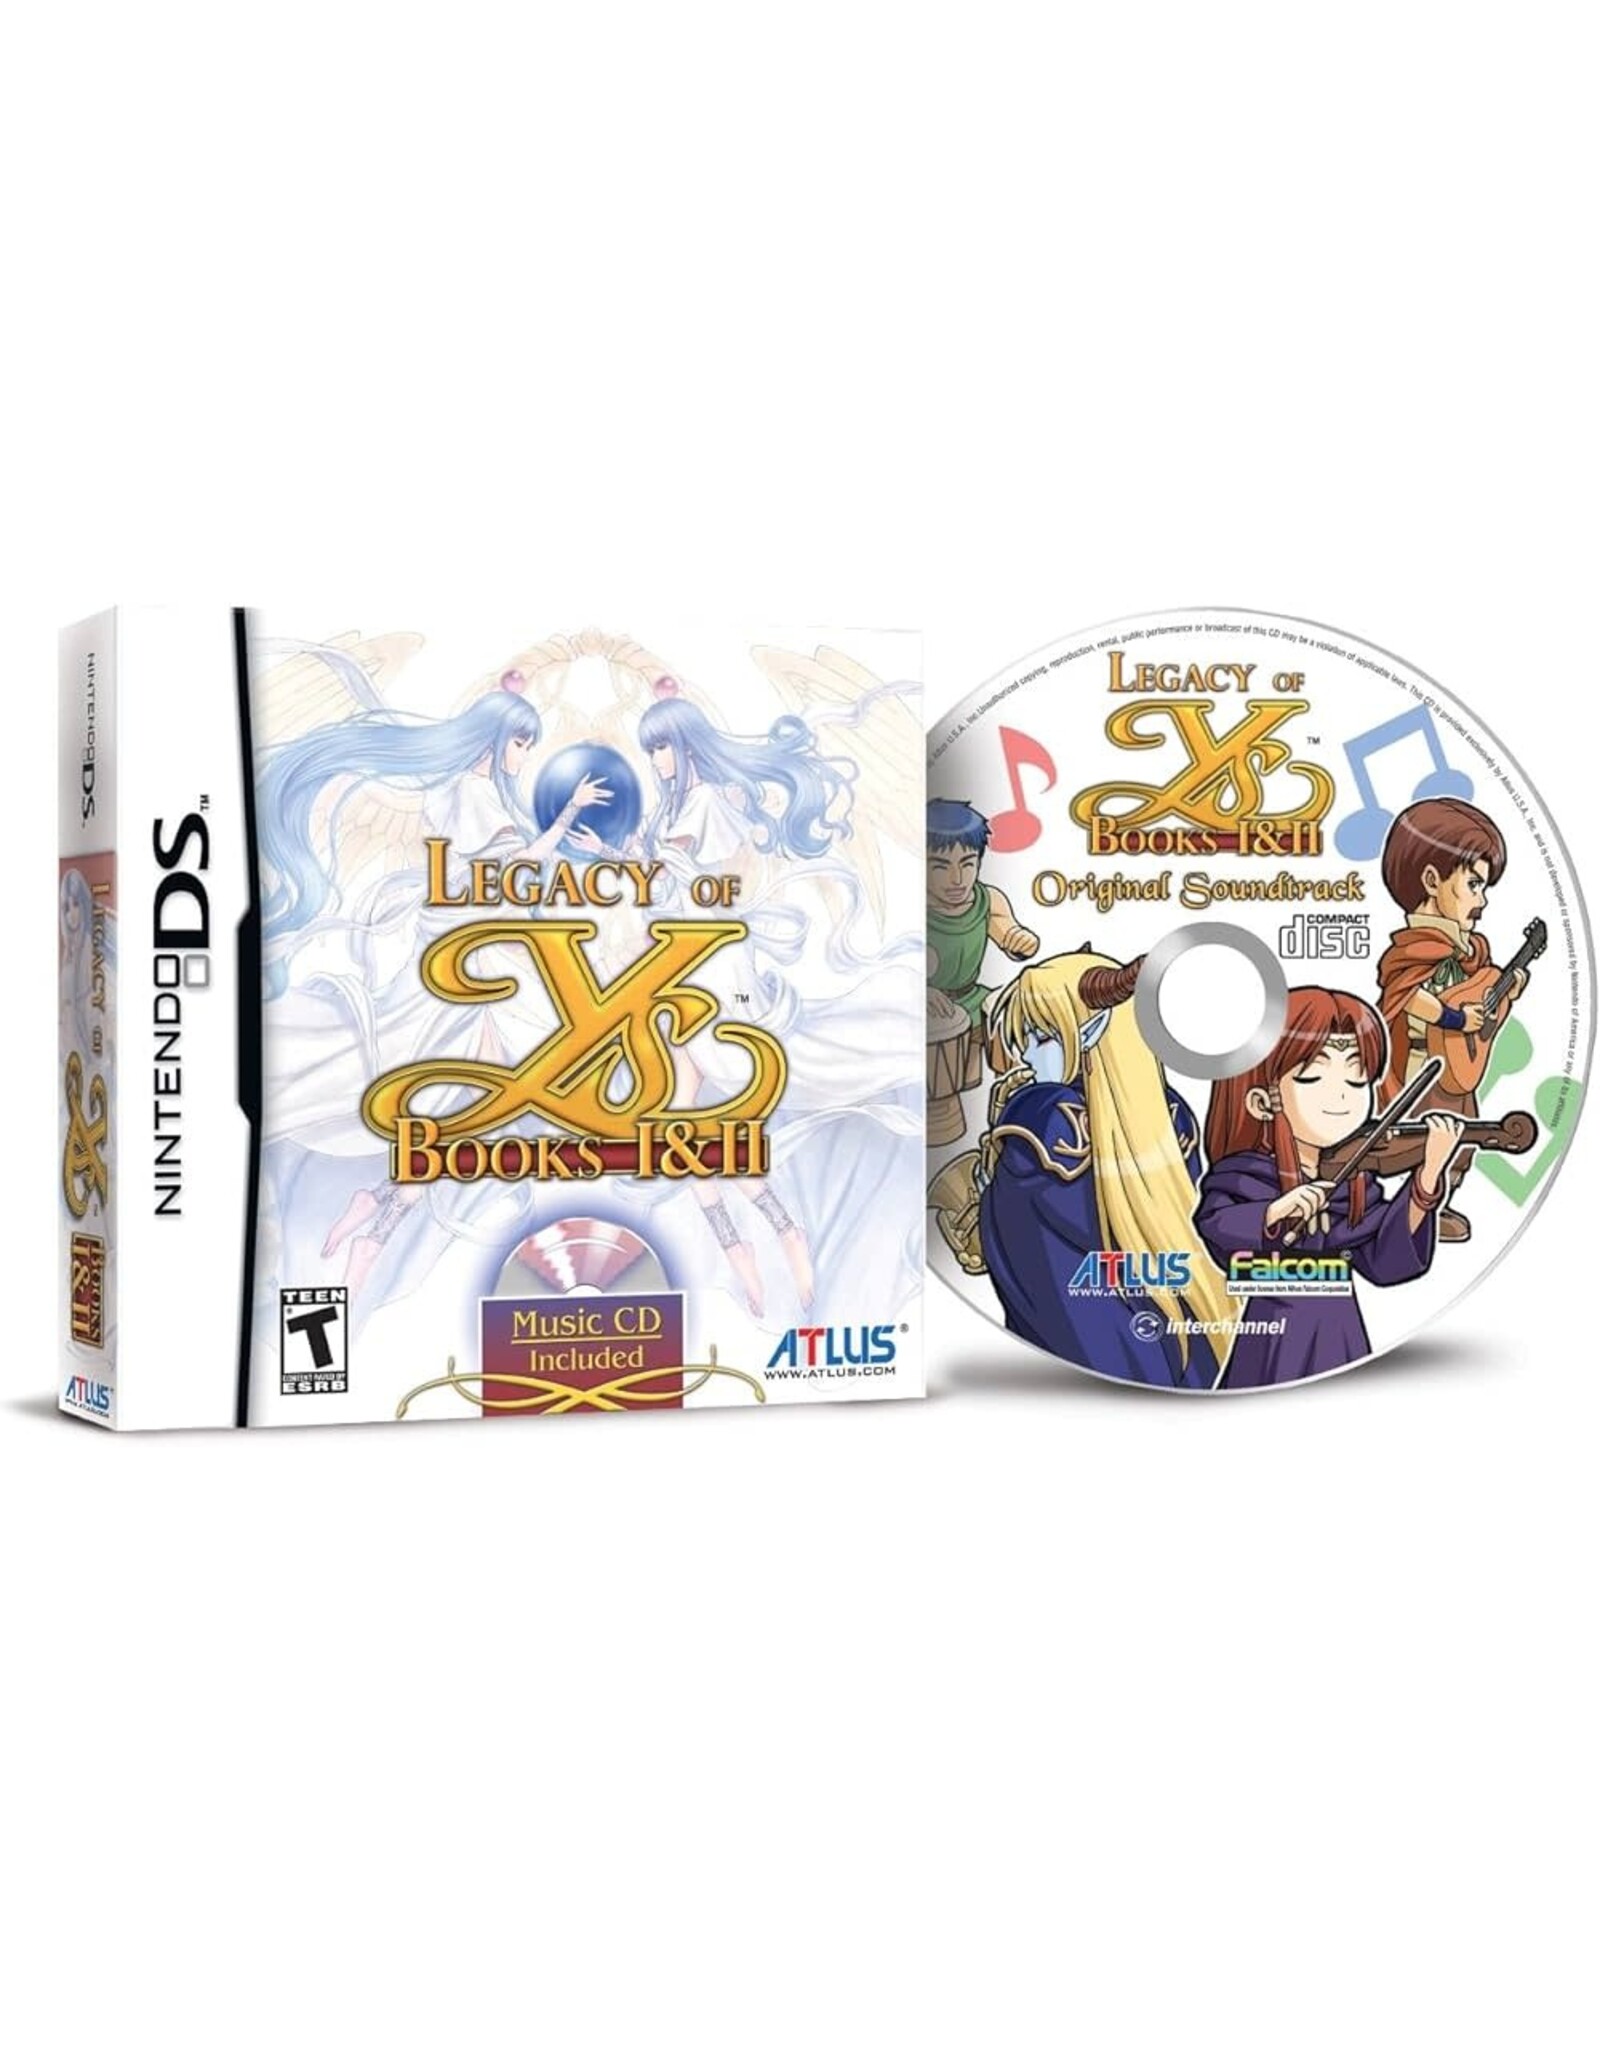 Nintendo DS Legacy of Ys: Books I & II Launch Edition (Used)